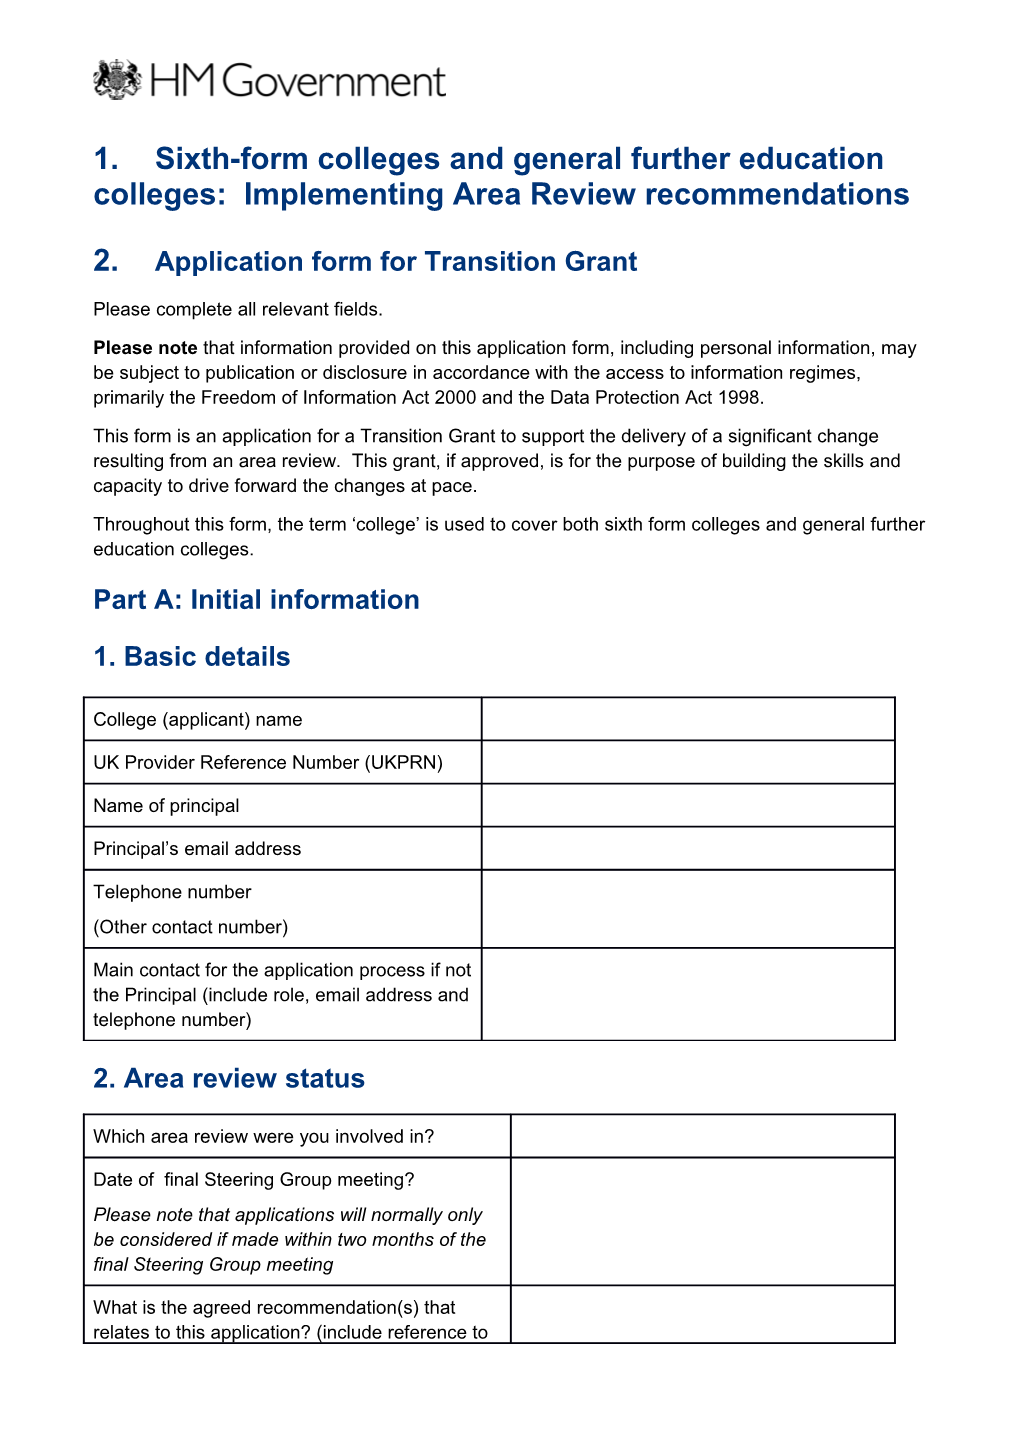 Application Form for Transition Grant